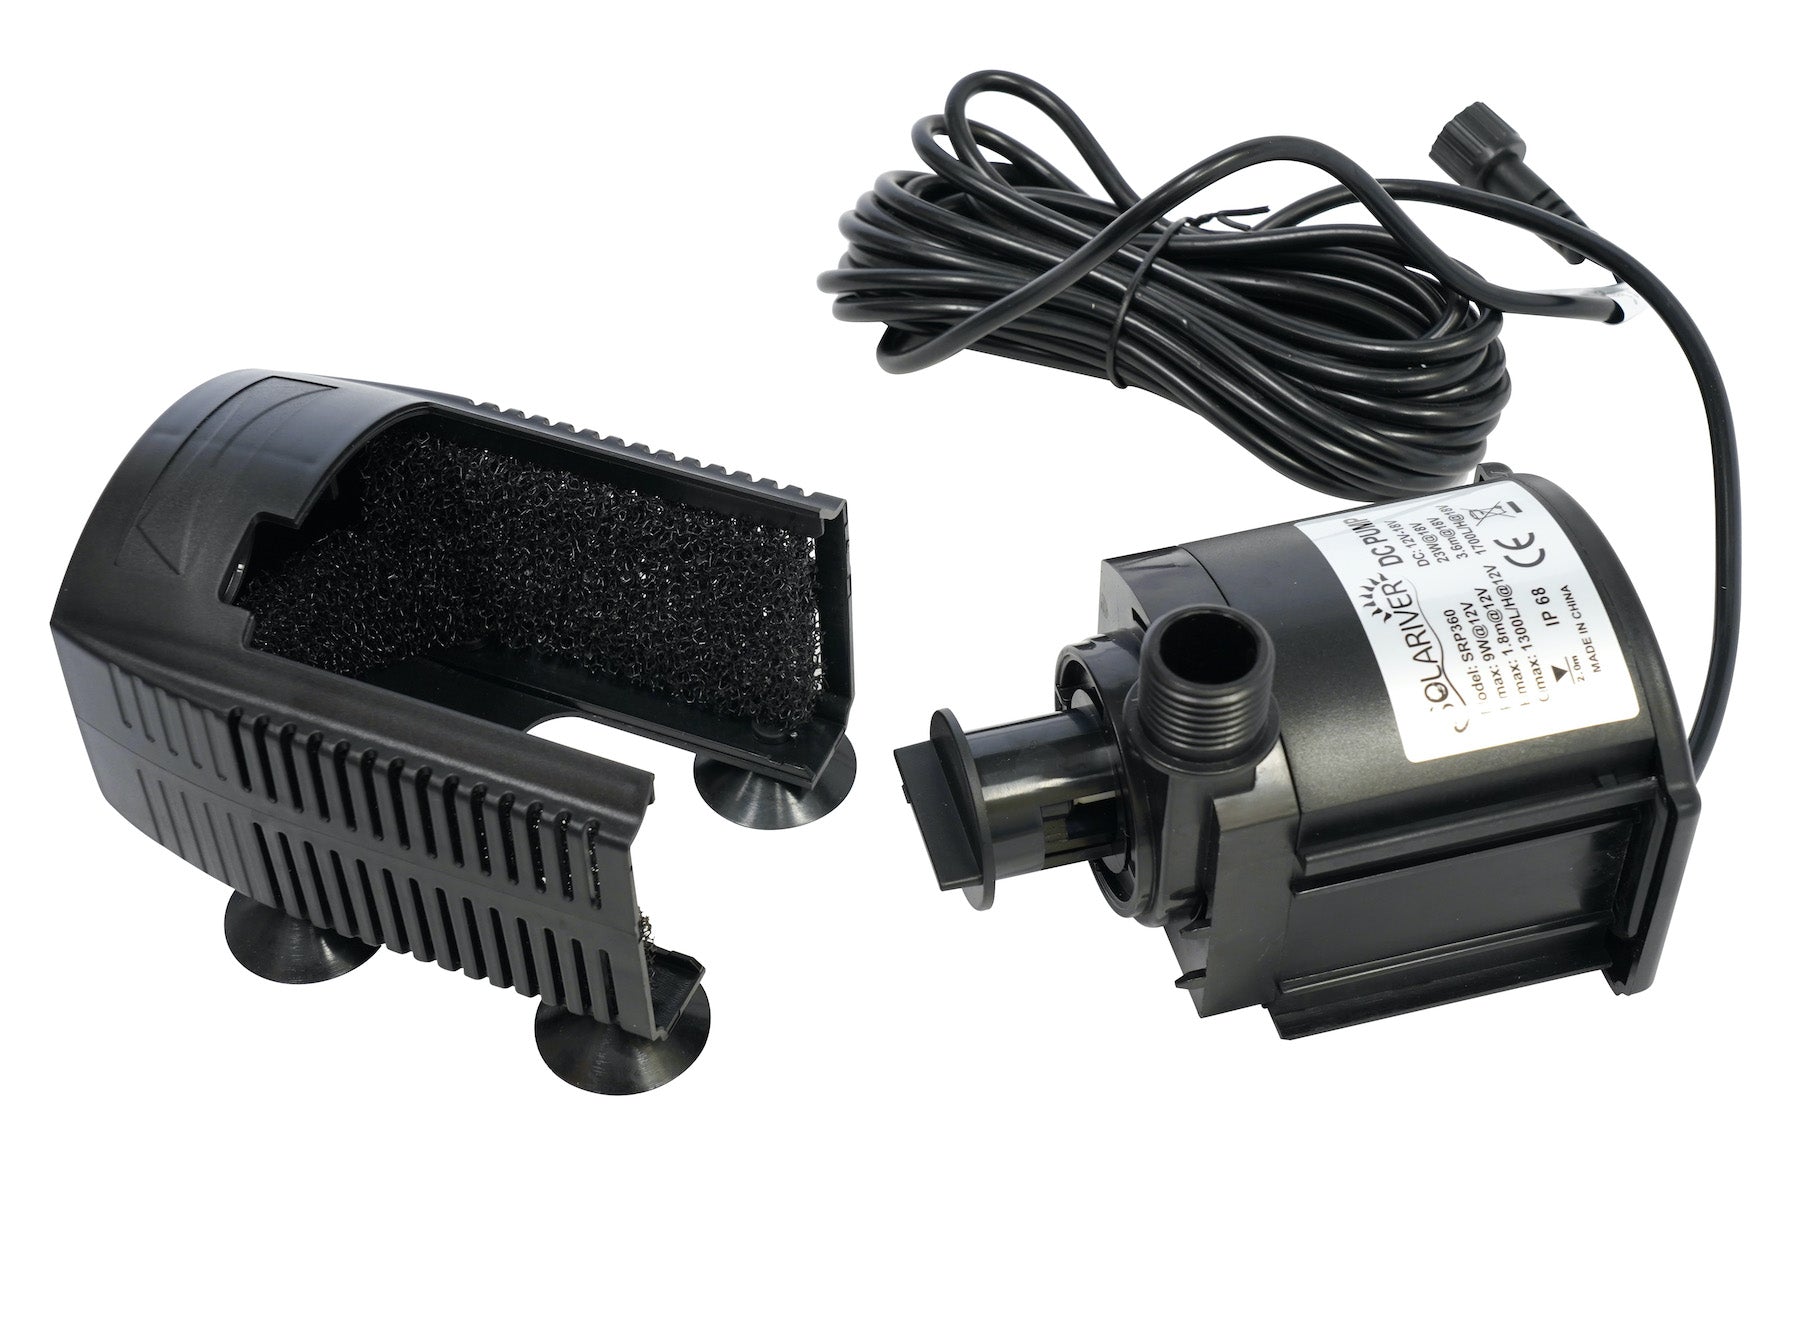 Solariver™Replacement Solar Water Pump (360+GPH, 12v DC Submersible) - disassembled